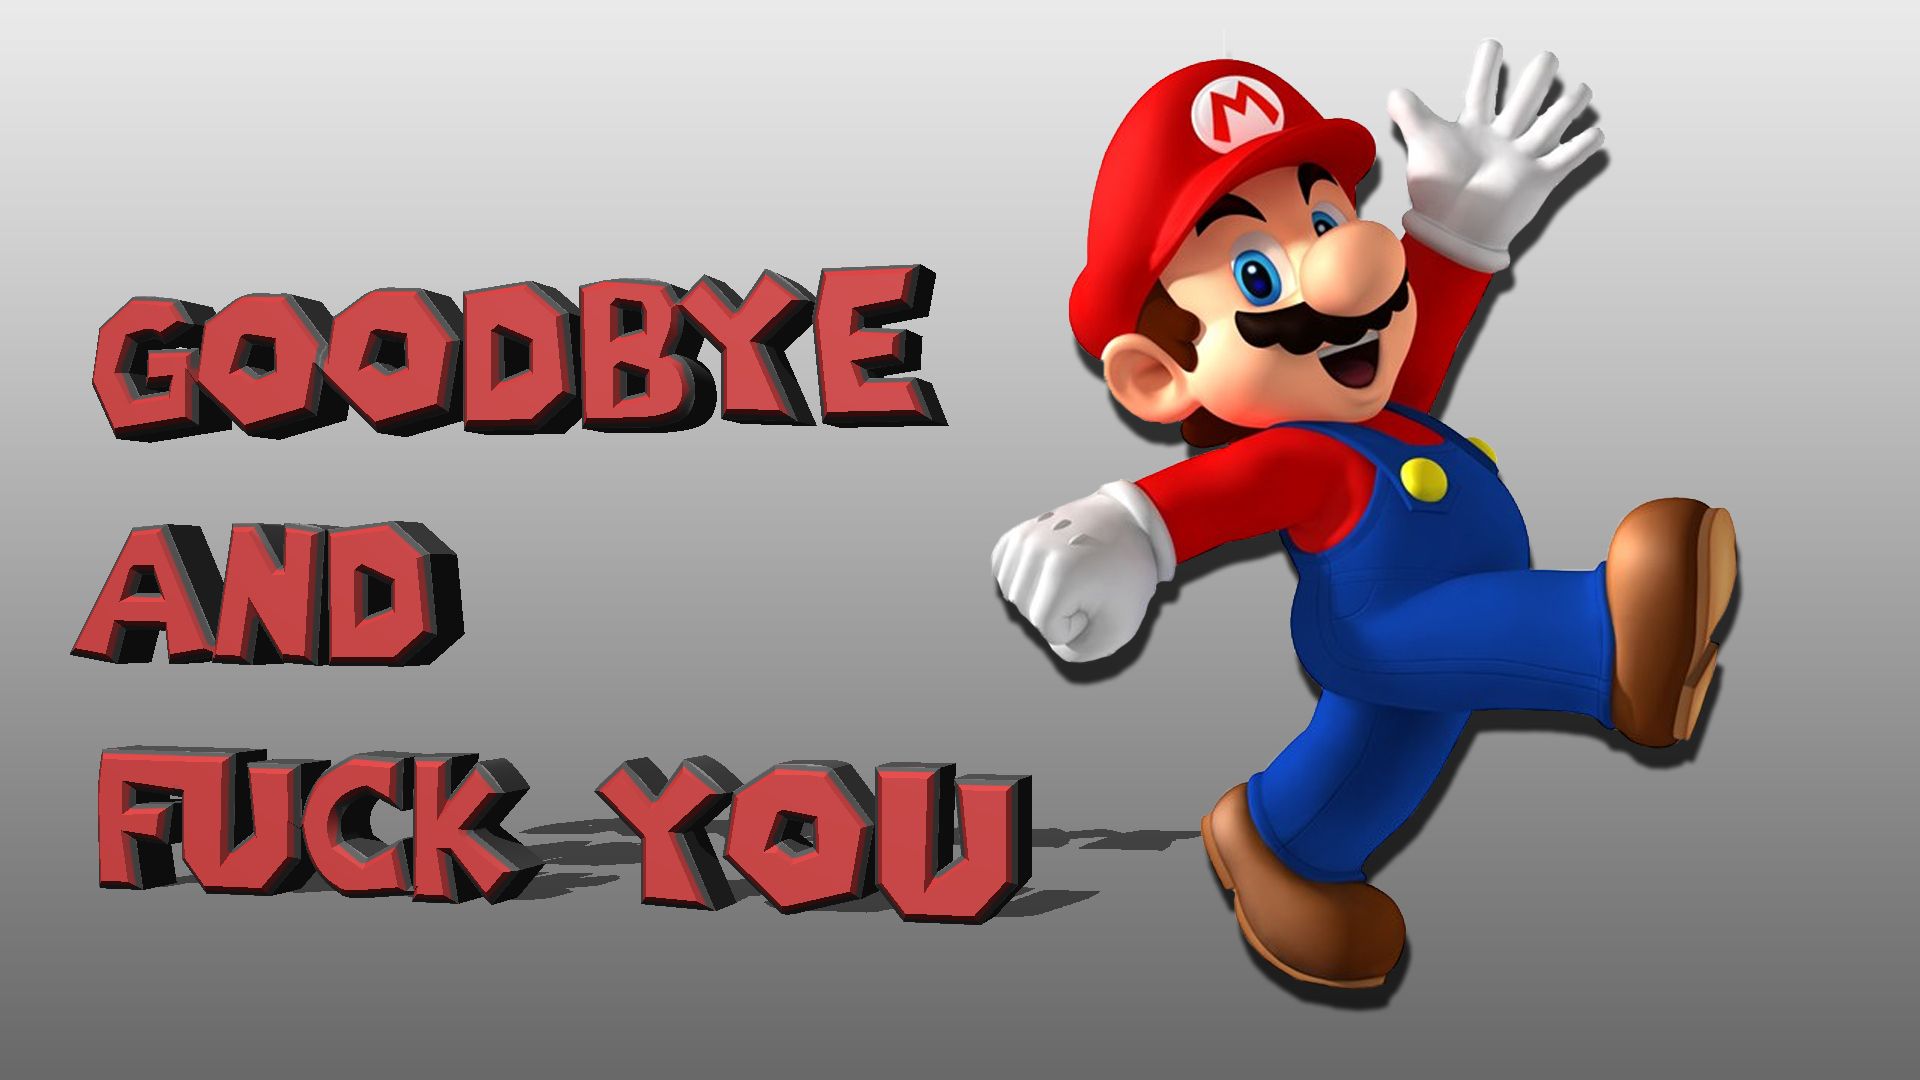 Supermario Good Bye And Fuck You Wallpaper [1920 x 1080]